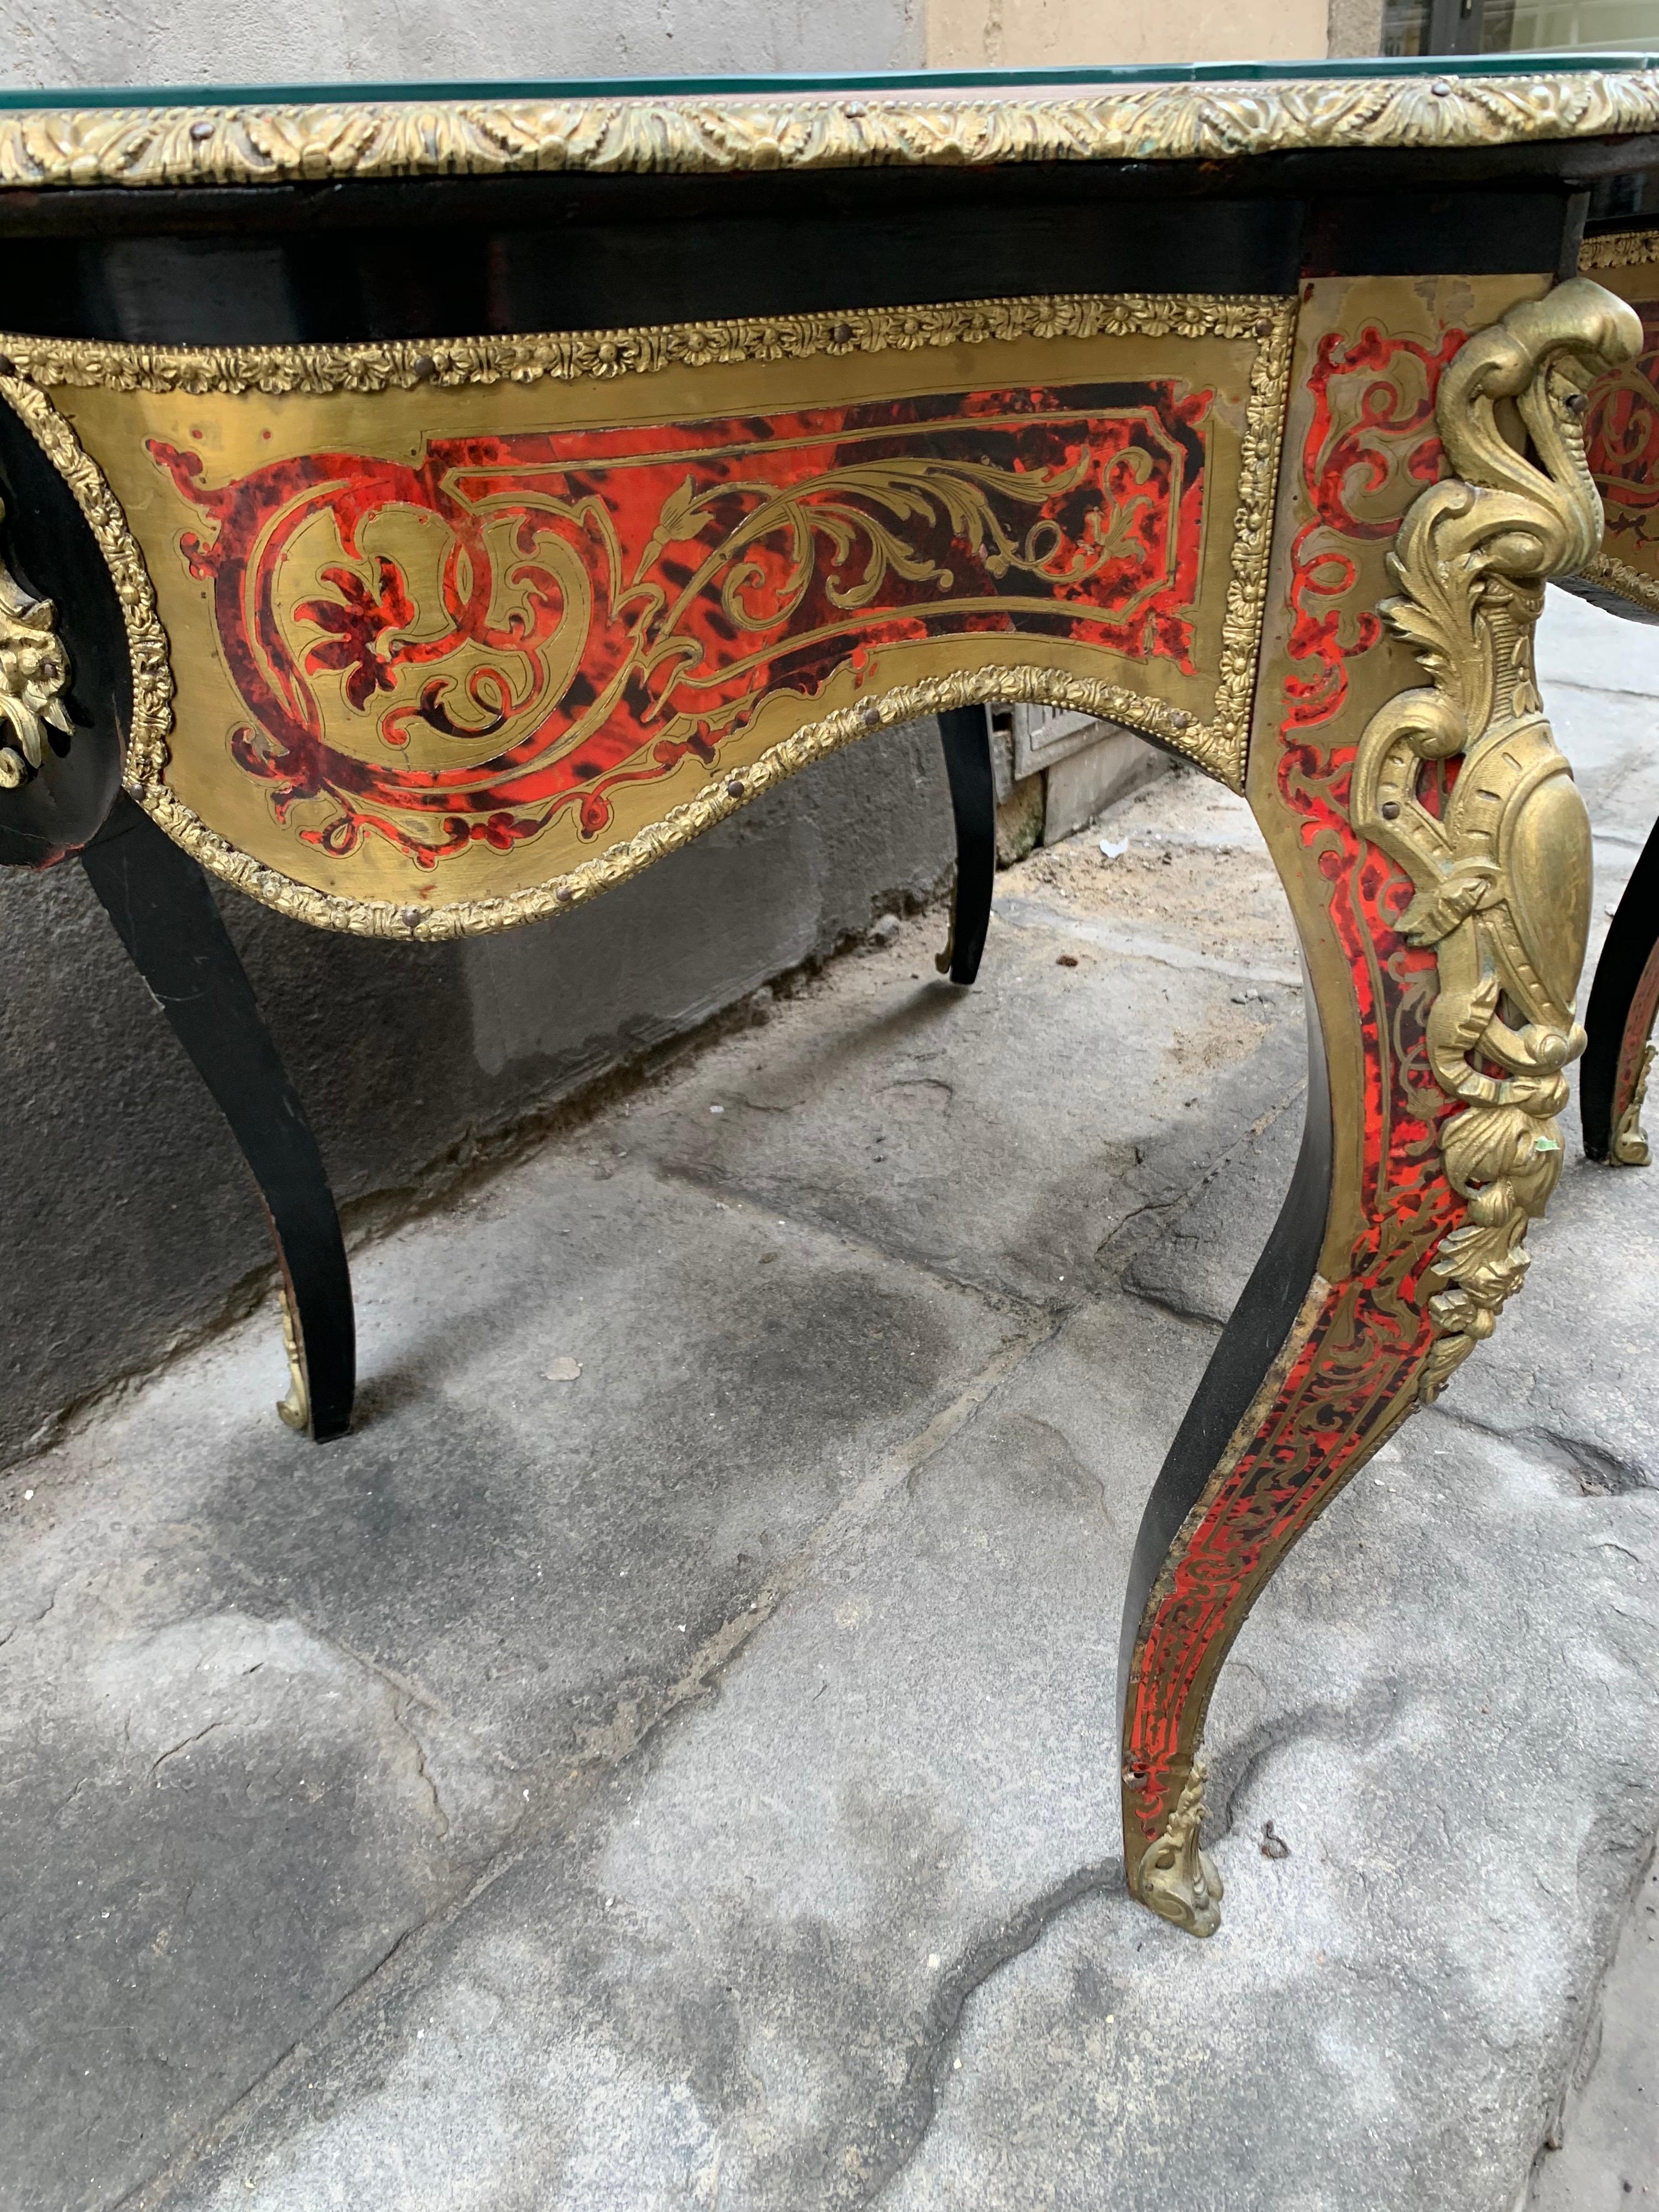 20th Century Charles-Boulle Style Mounted Tortoiseshell Engraved Brass and Ebony Desk, 1900 For Sale